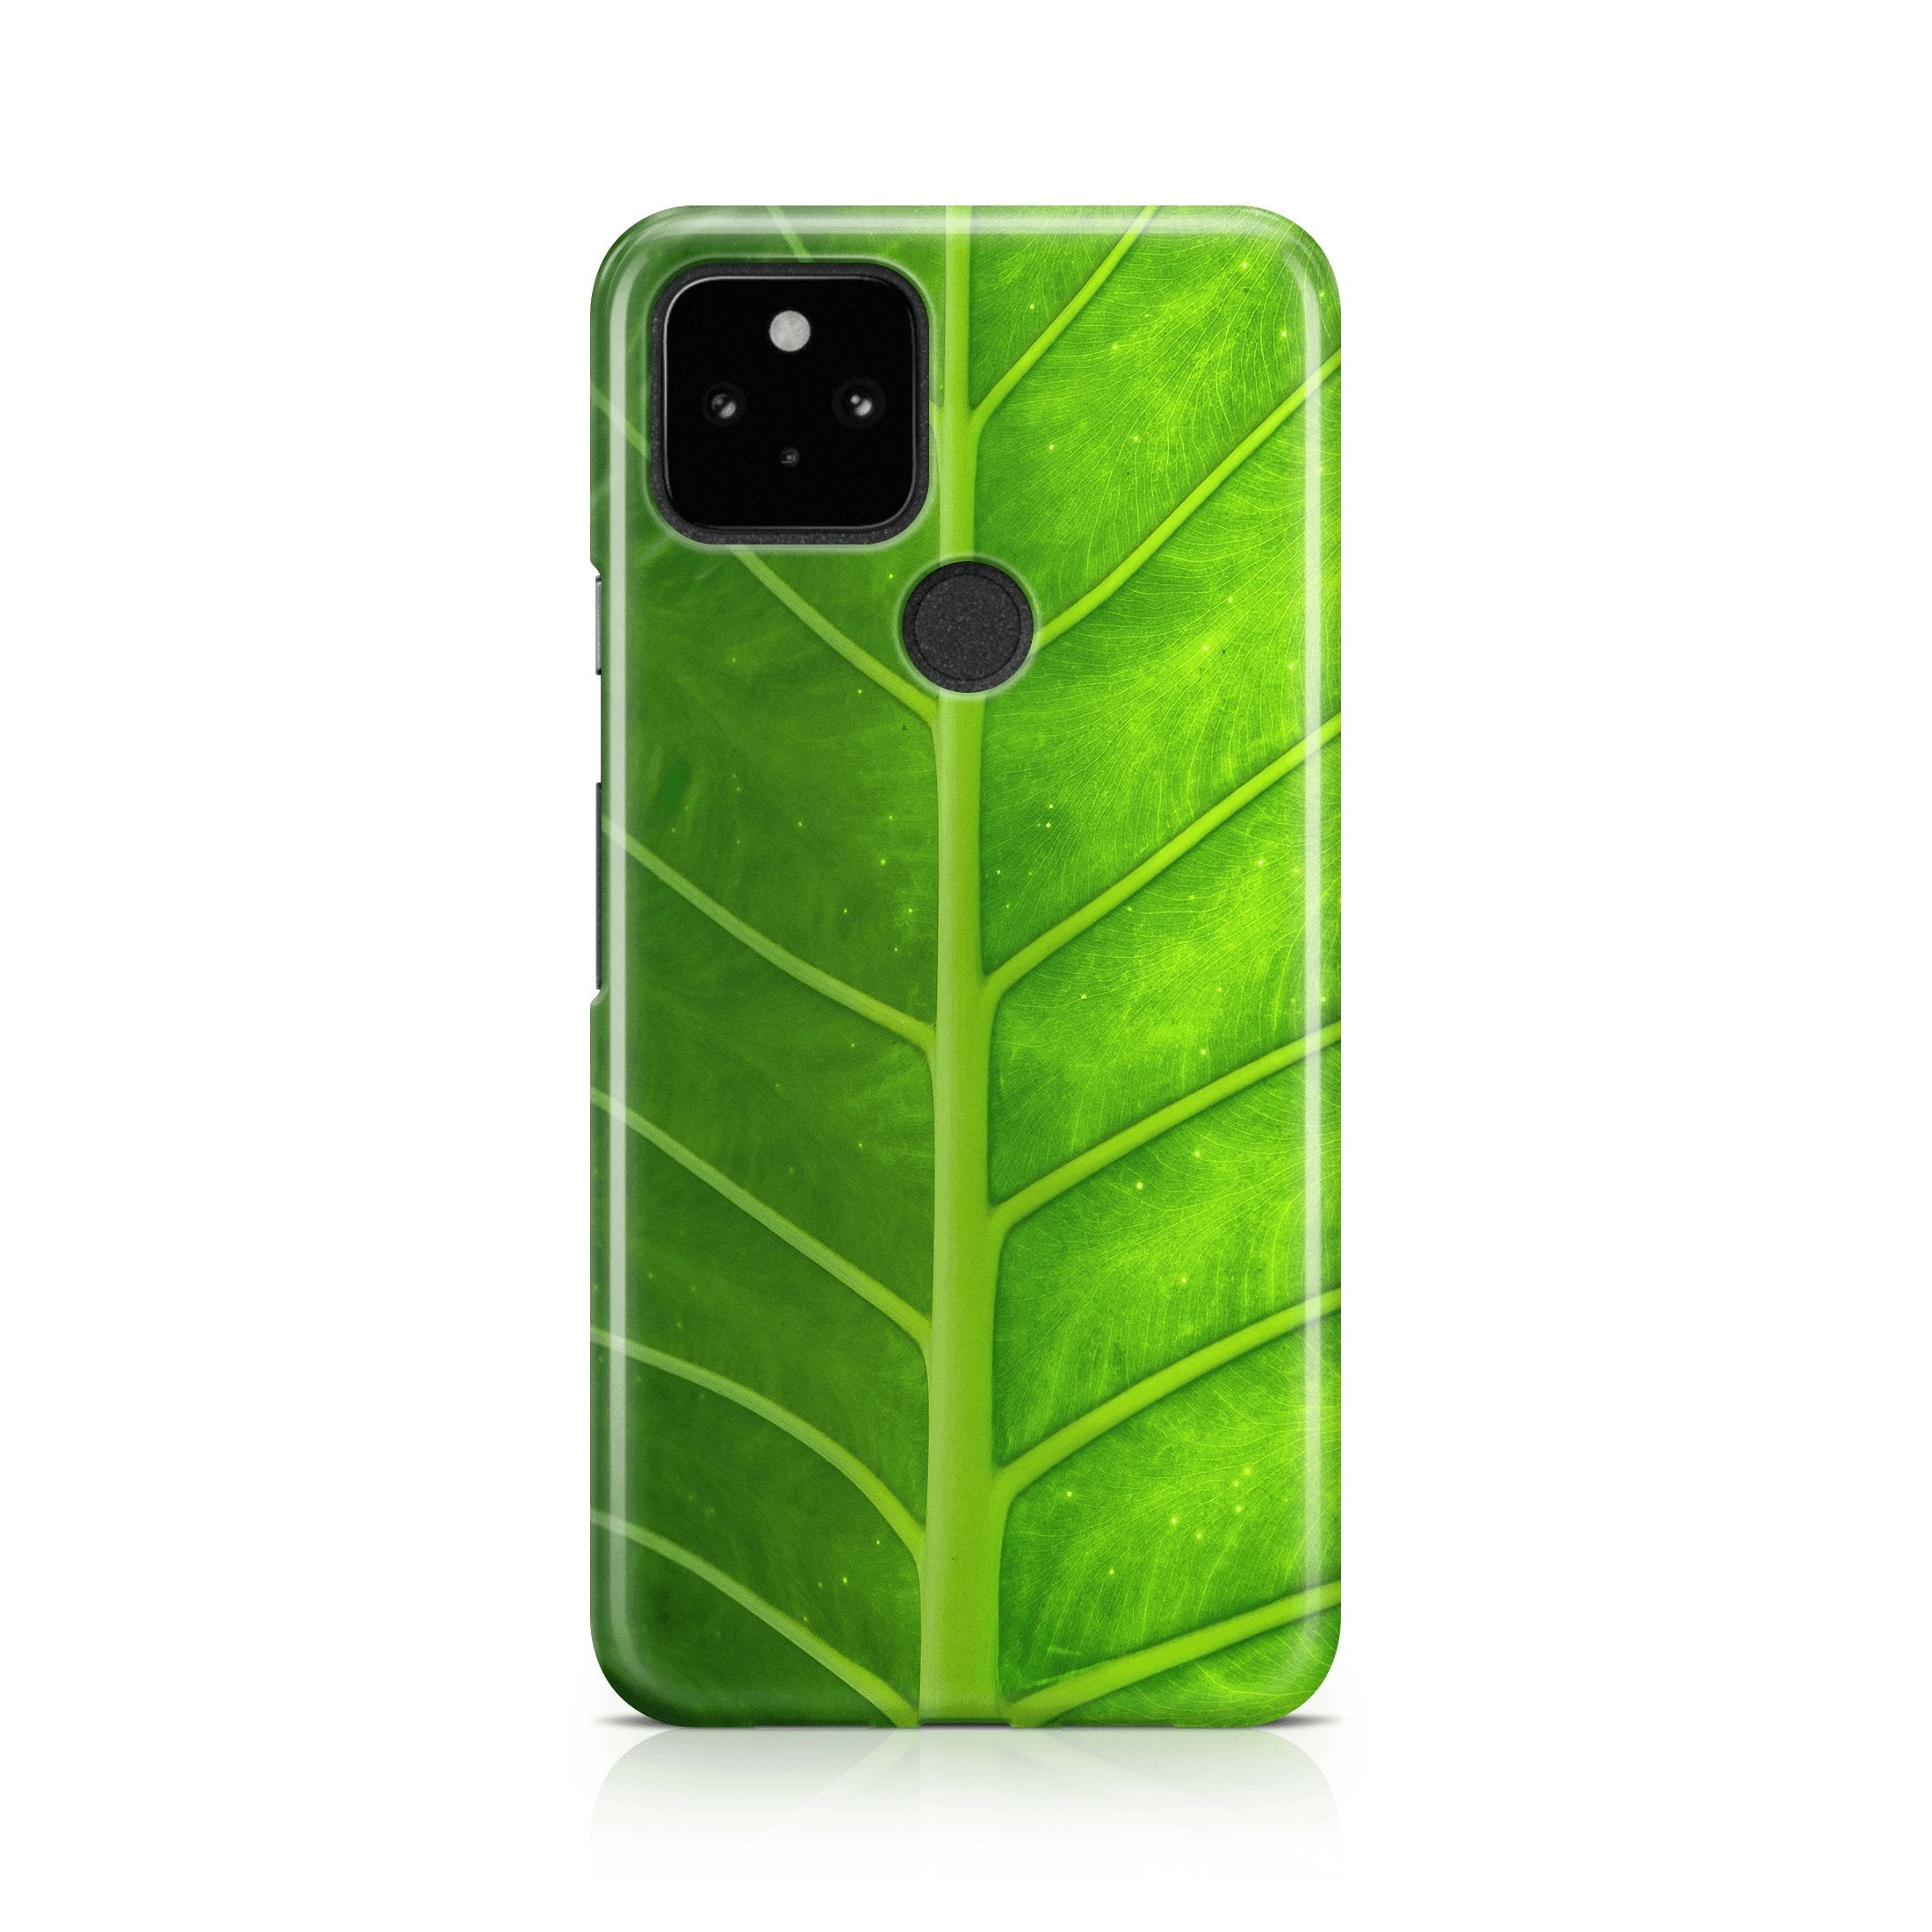 Leaf Spine - Google phone case designs by CaseSwagger